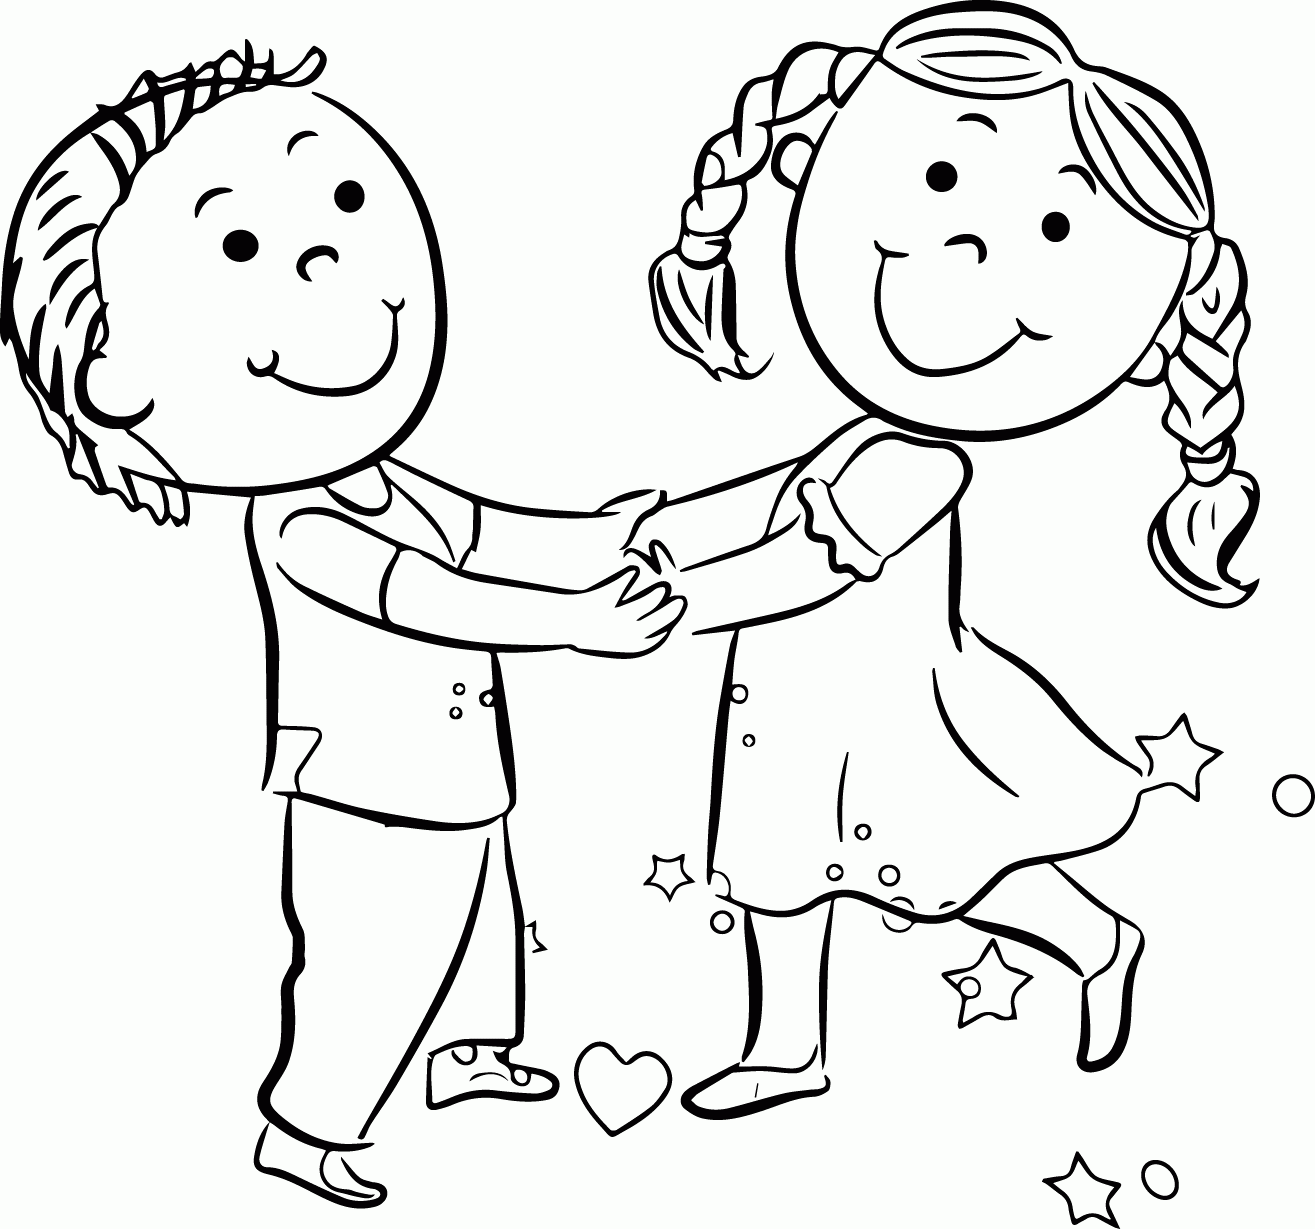 Happy Children Coloring Page | Wecoloringpage